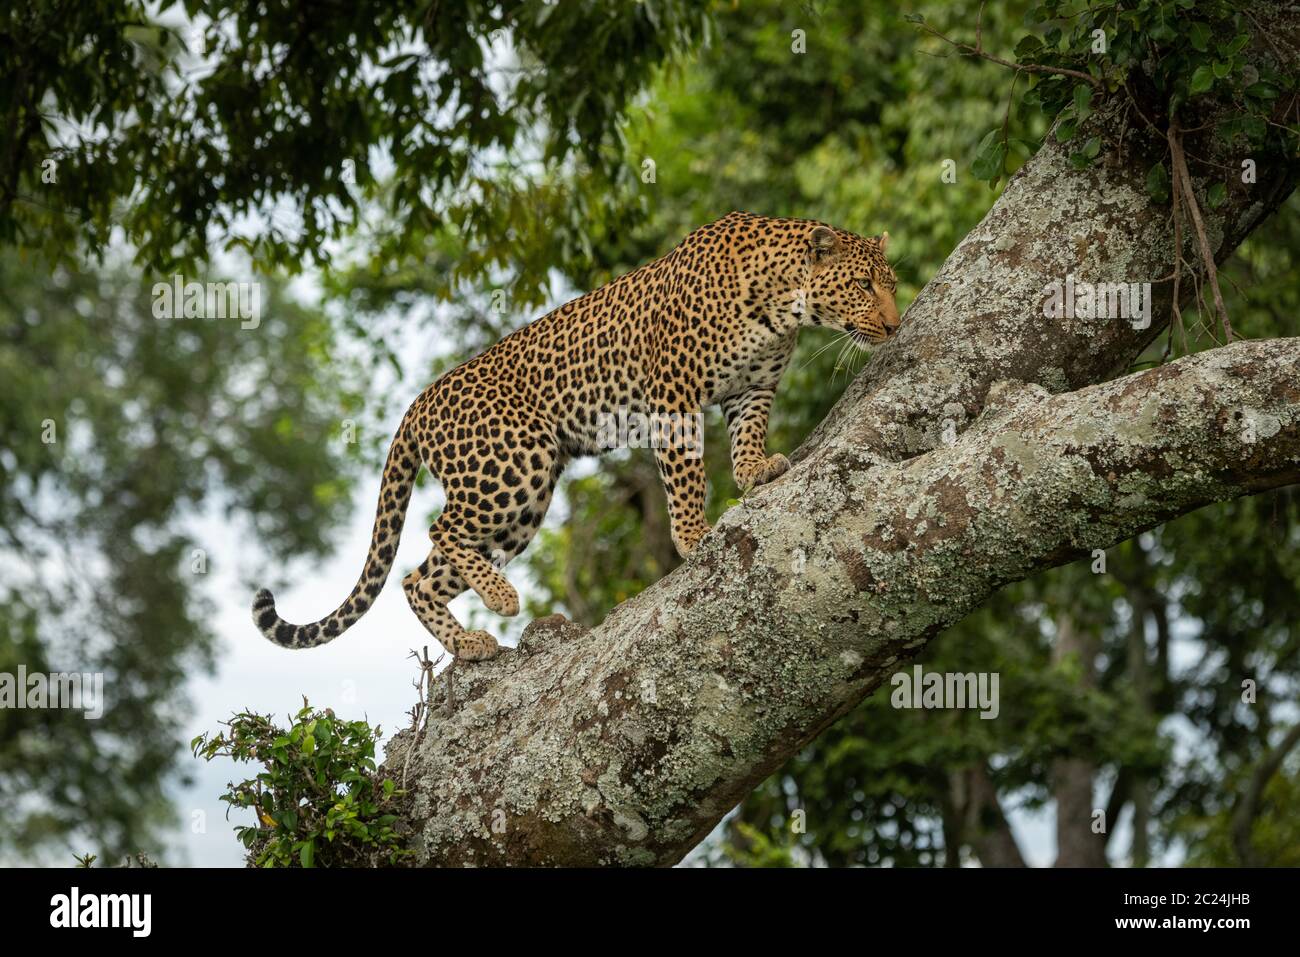 Leopard climbs up lichen-covered branch lifting foot Stock Photo